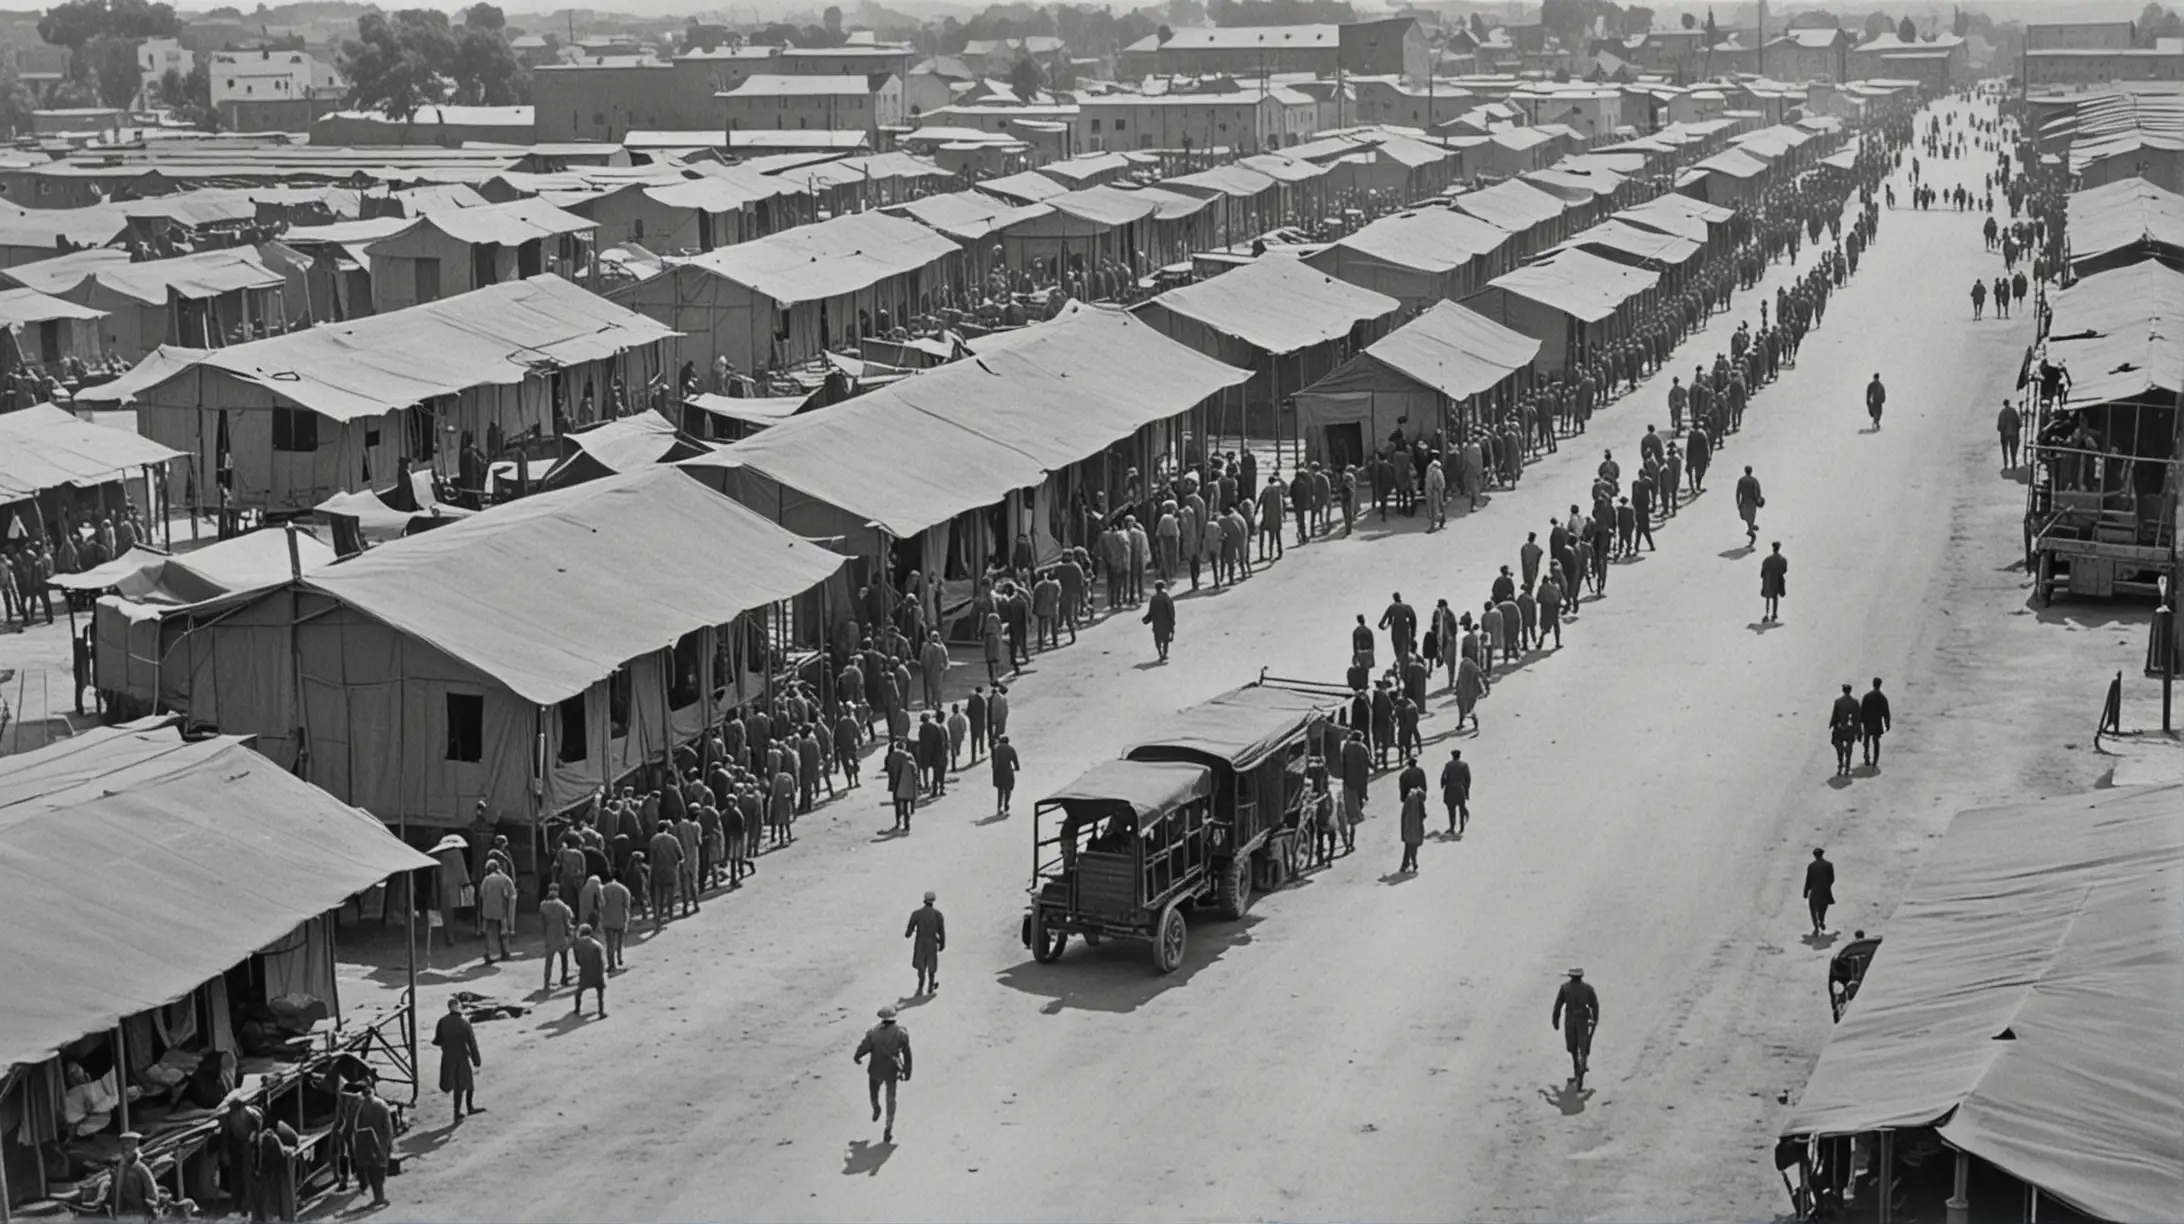 Military Camp in 1910 Rows of Barracks and People Walking